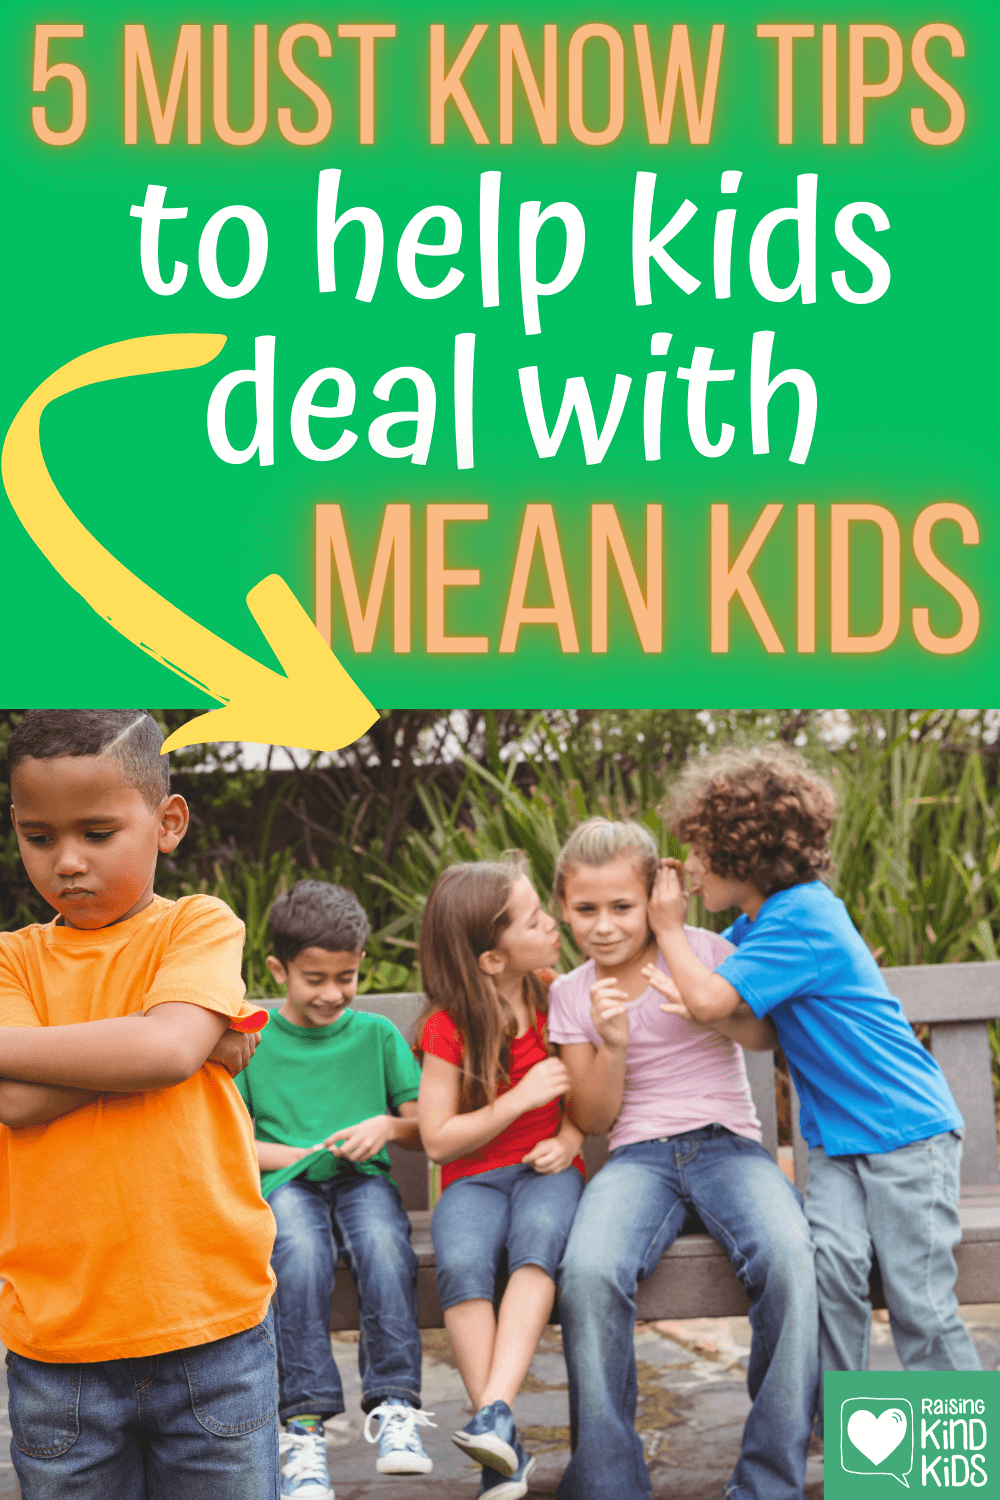 Are your kids dealing with unkind kids on the playground? Use these 5 tips to help your kids deal with mean kids without being mean themselves. Help your kids stay kind because kindness matters. #kindness #kindkids #unkindkids #bullies